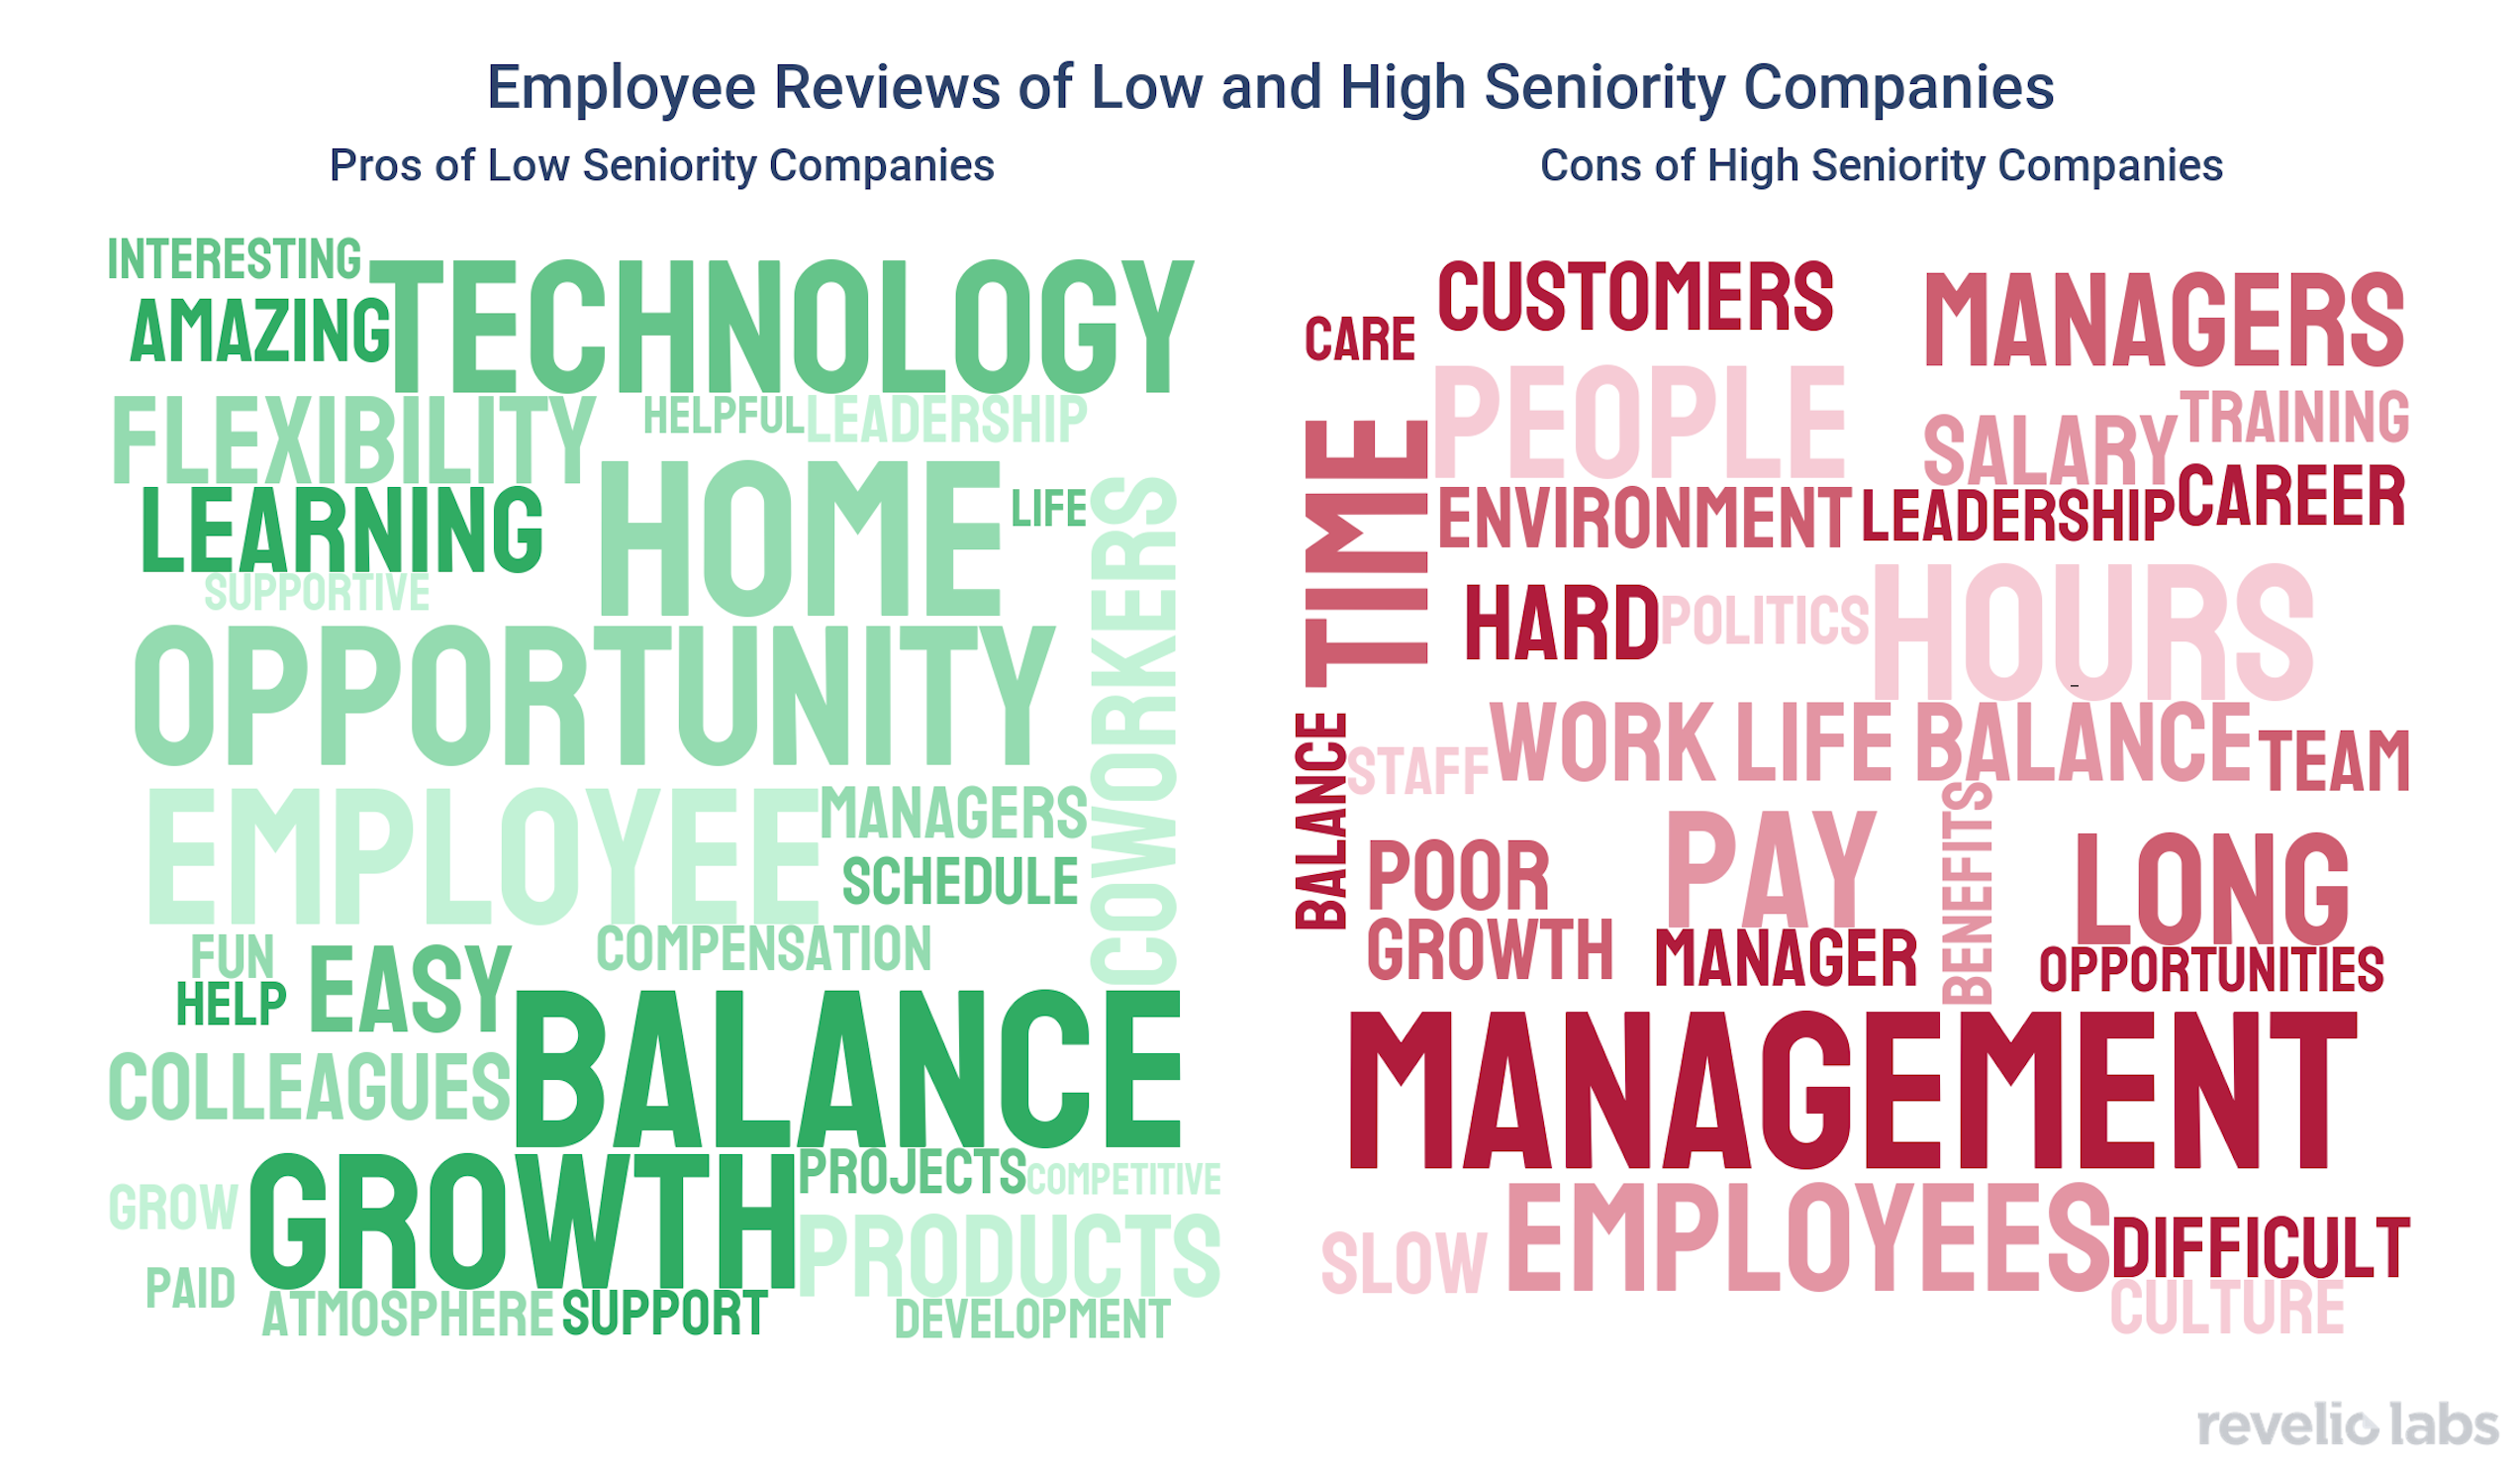 Employee reviews of low and high seniority companies